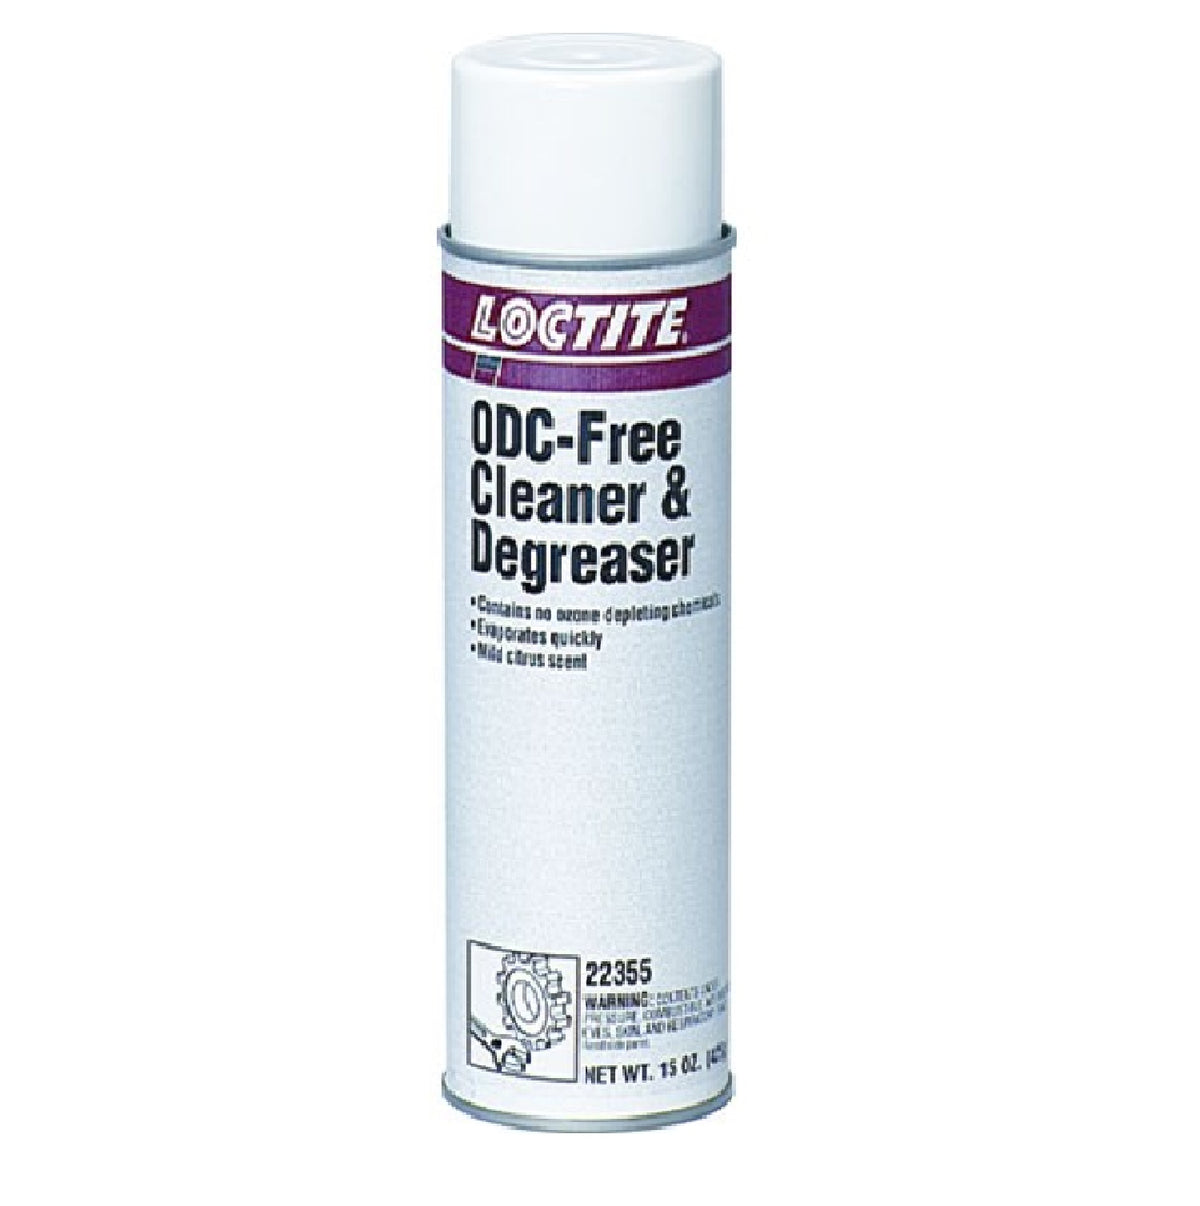 Buy loctite 22355 - Online store for lubricants, fluids & filters, degreasers in USA, on sale, low price, discount deals, coupon code